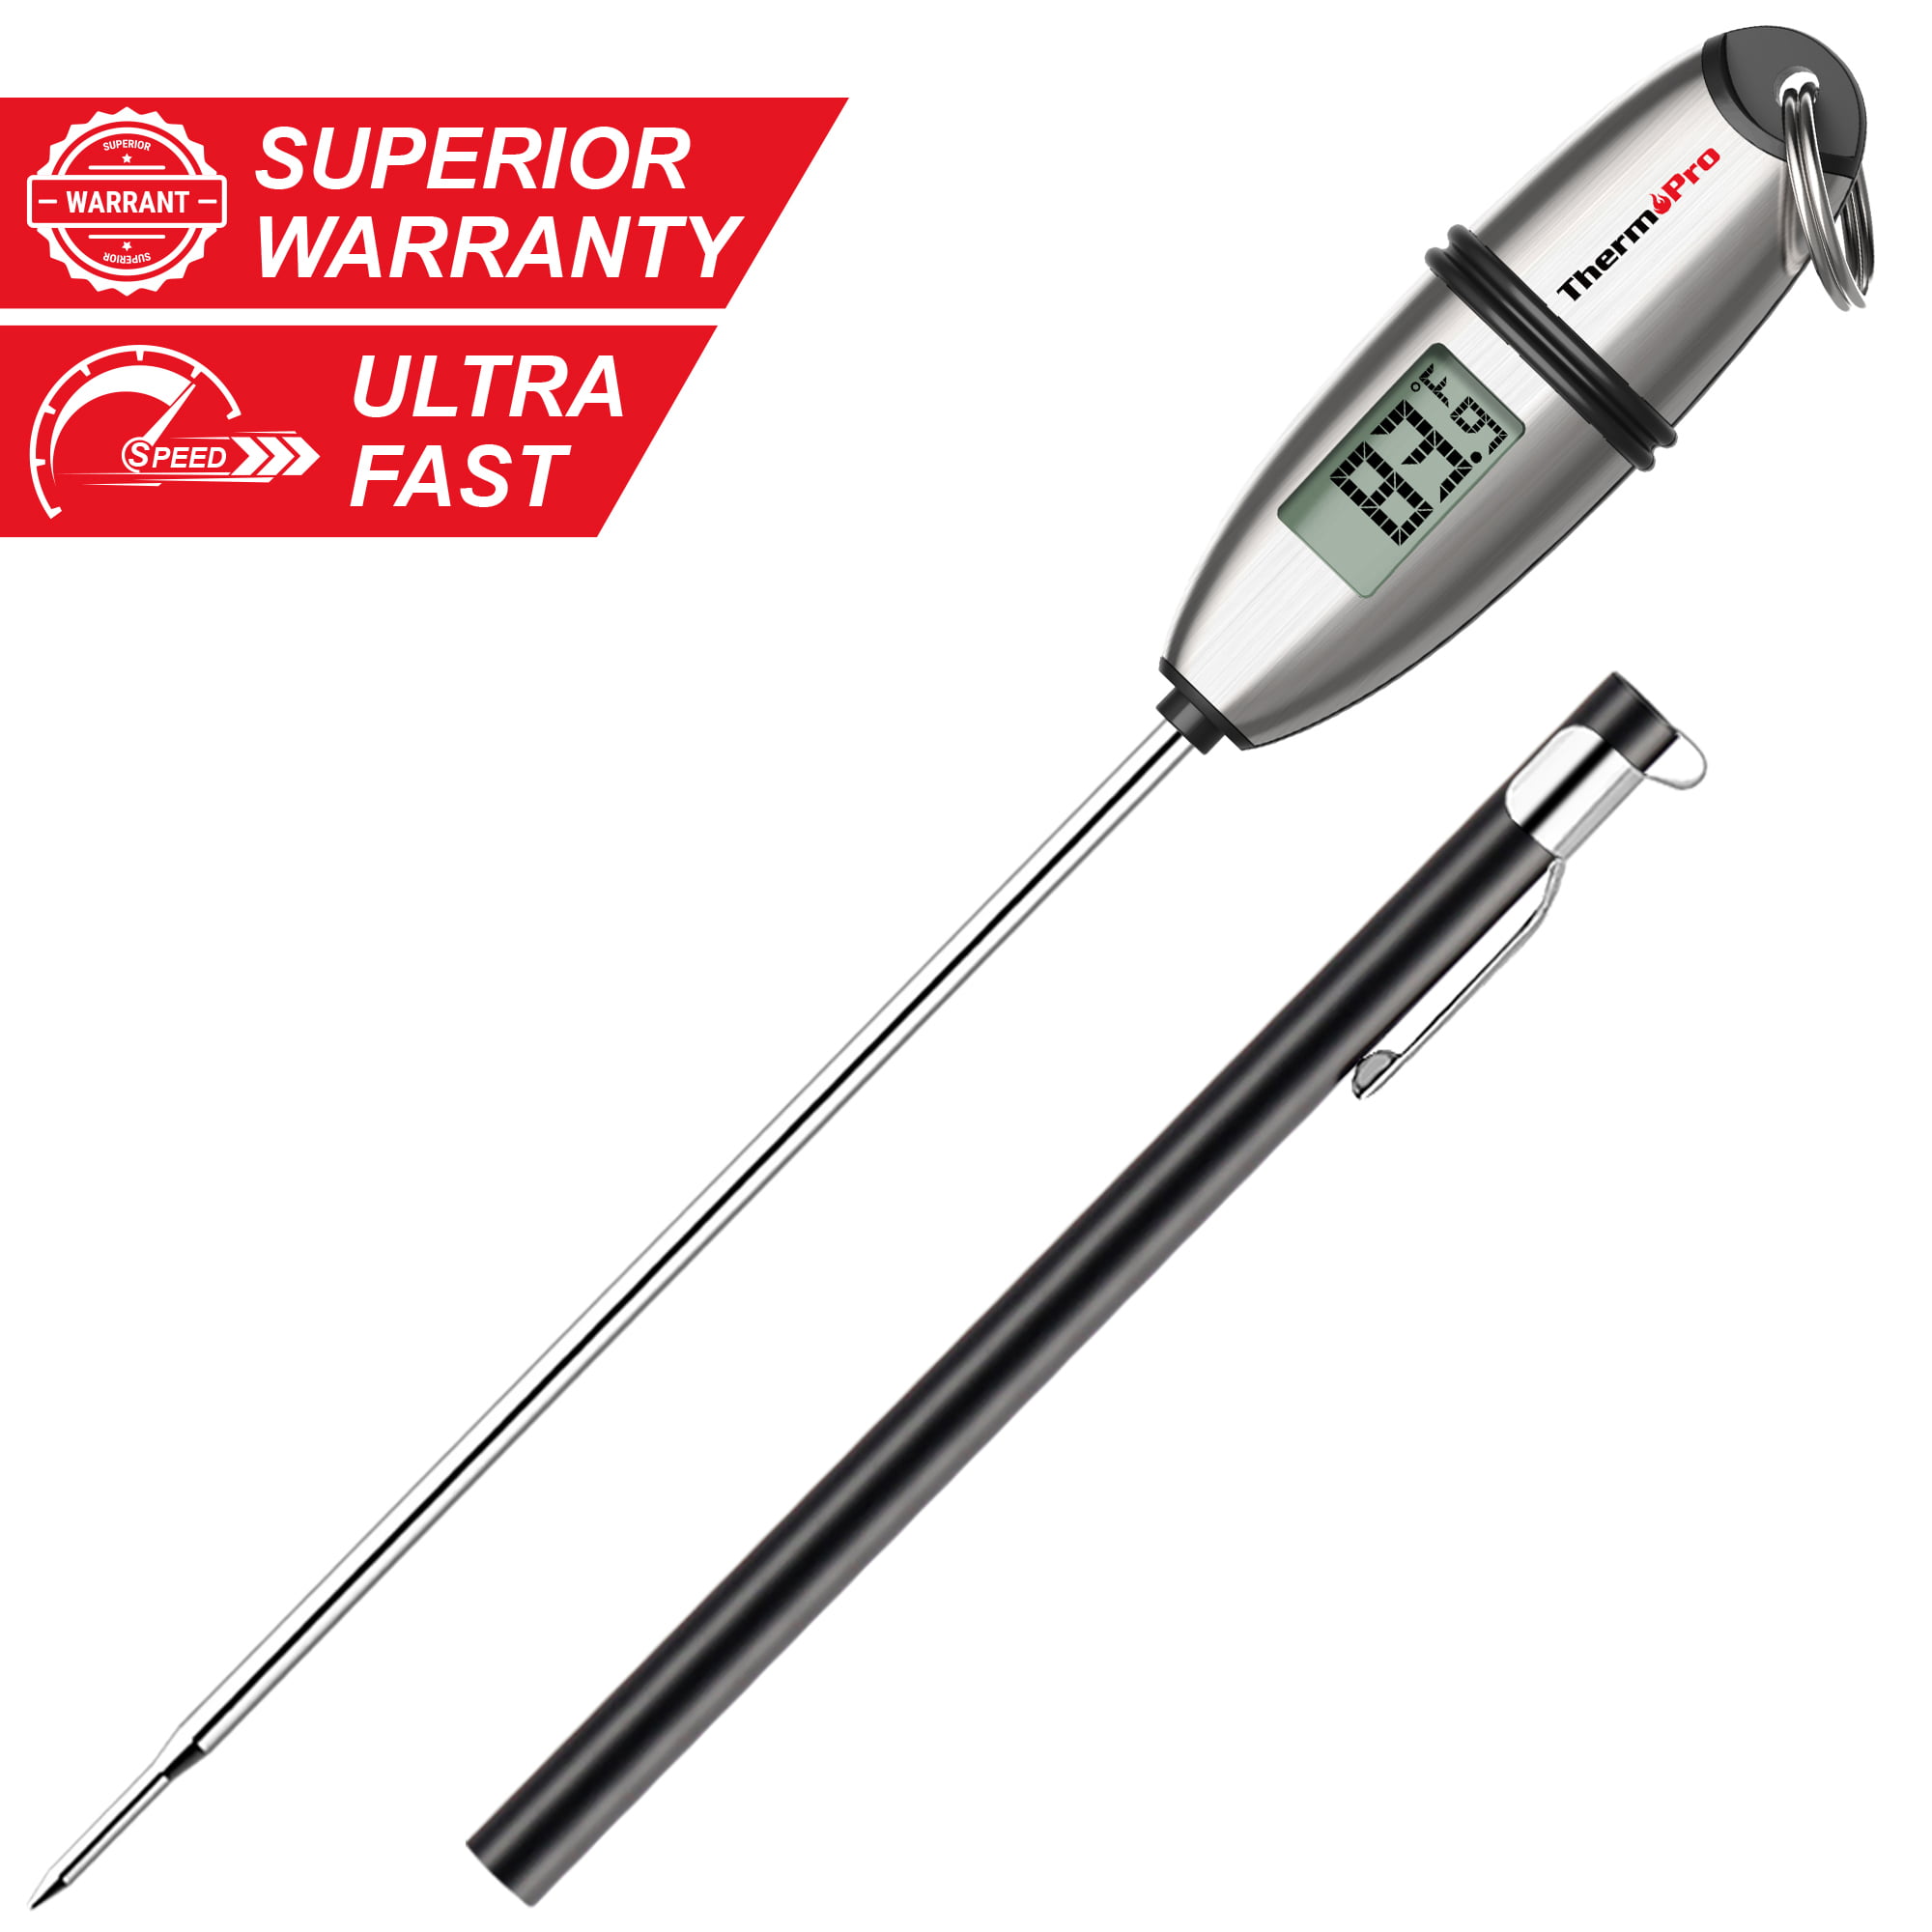 Digital Food Meat Cooking Thermometer BBQ Grill Smoker Instant Read For Kitchen 